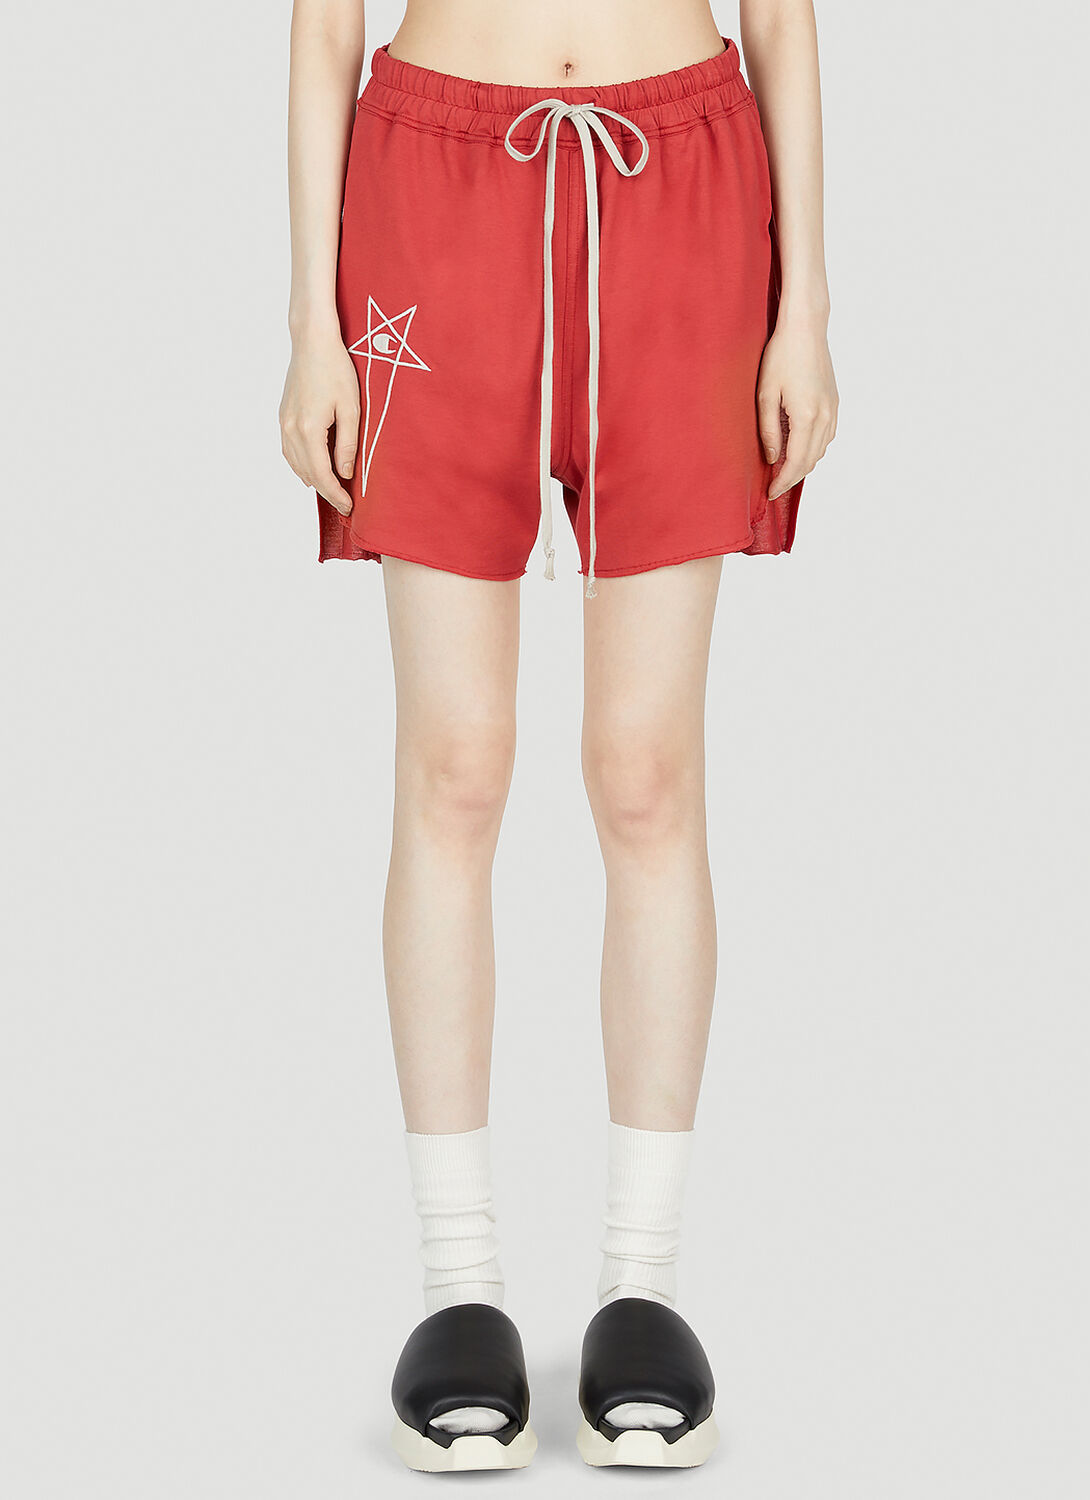 Rick Owens X Champion Dolphin Boxers 219236 In Red